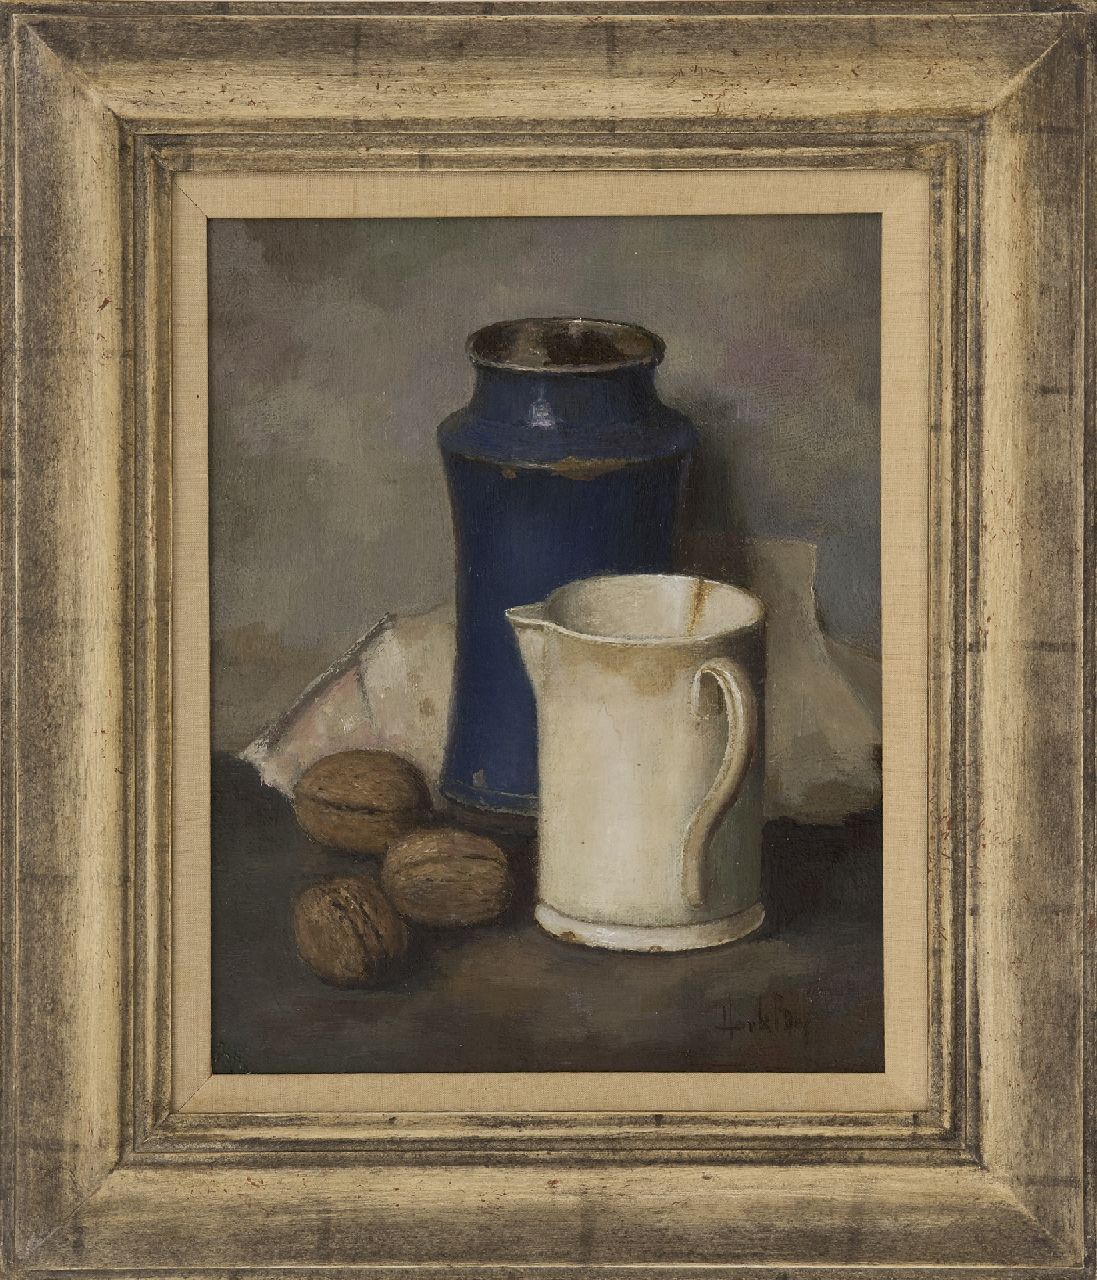 Bos H.  | Hendrik 'Henk' Bos | Paintings offered for sale | A still life with pottery and walnuts, oil on canvas 30.3 x 24.5 cm, signed l.r.